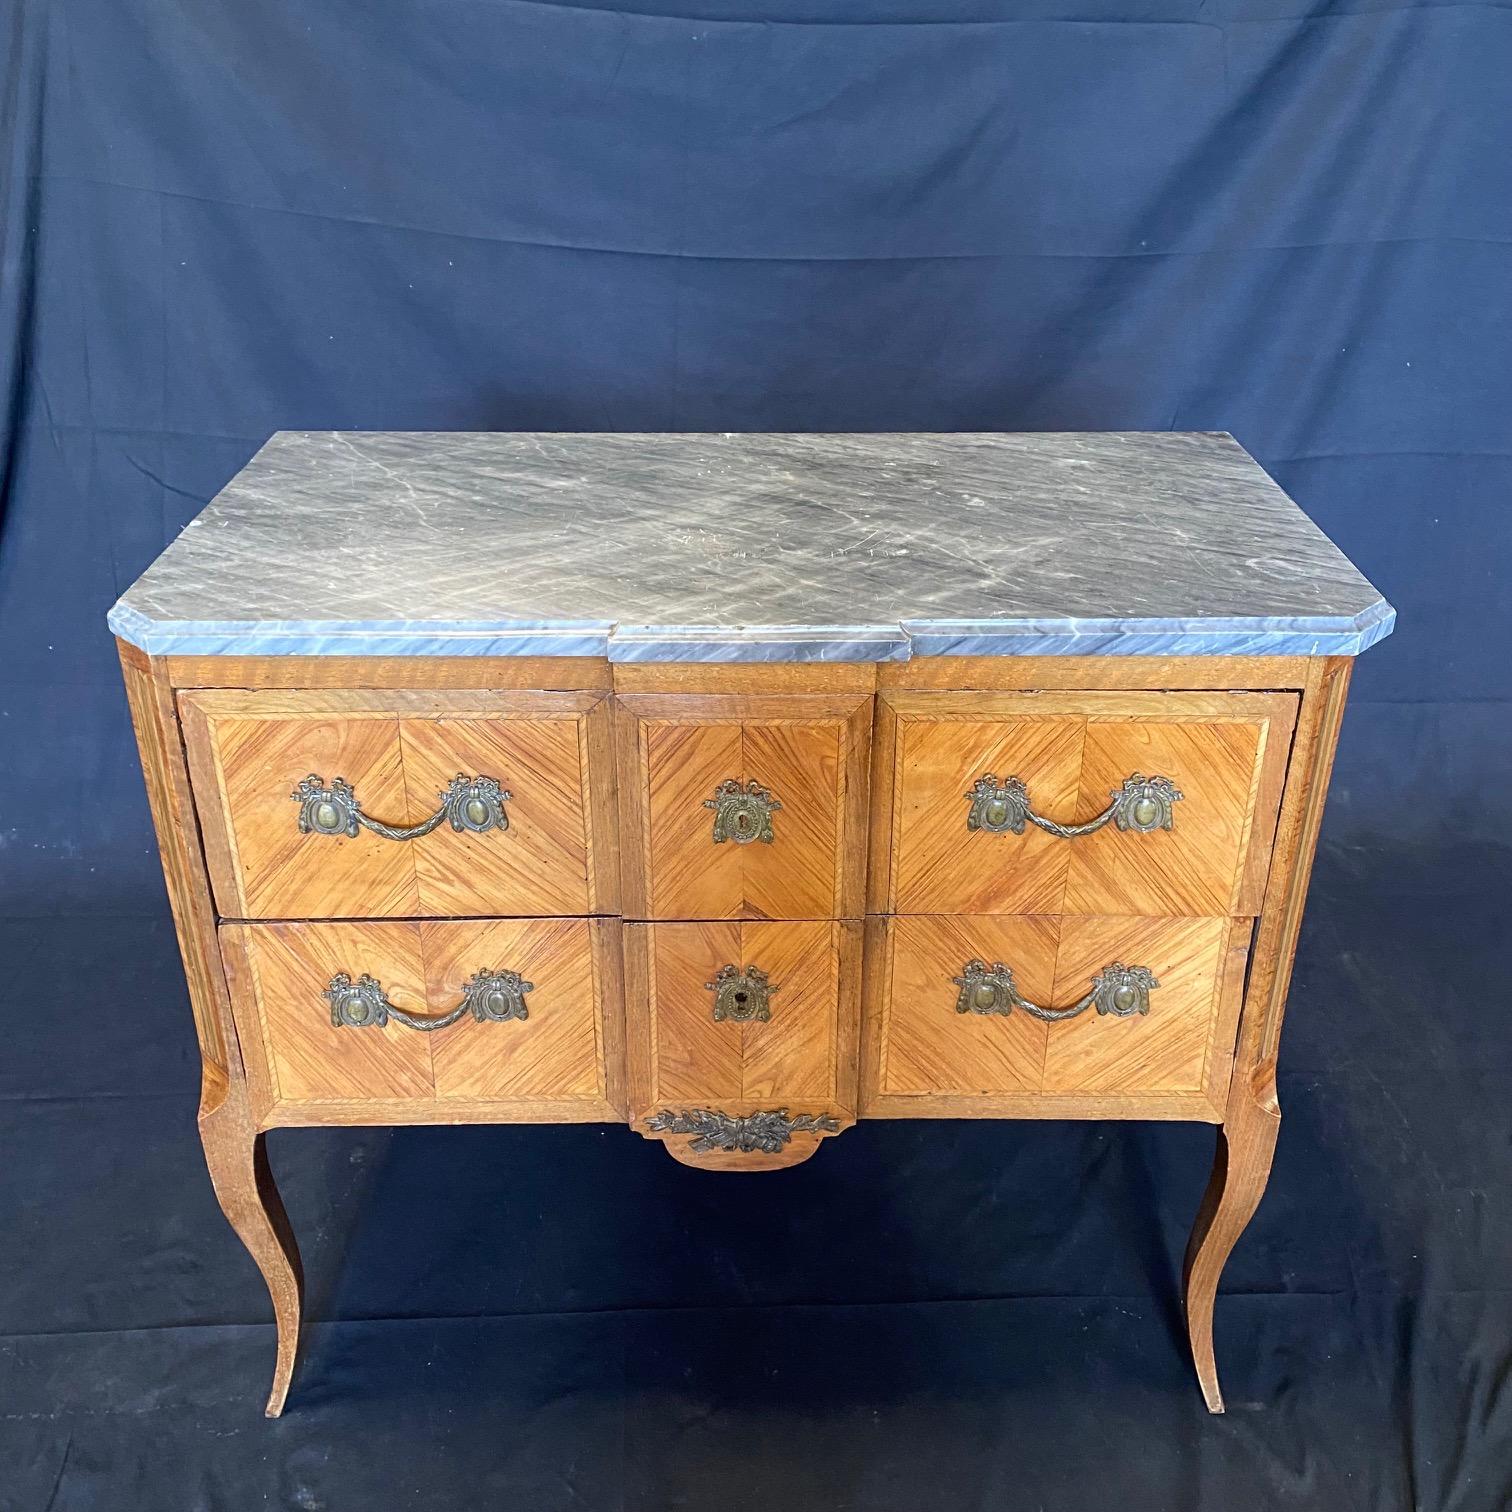 French antique 2 drawer commode having exquisite attention to detail with fine floral marquetry inlays and a central marquetry vignette with musical instruments accented with a bow. The stunning marble top is original and the bronze mounts crisply